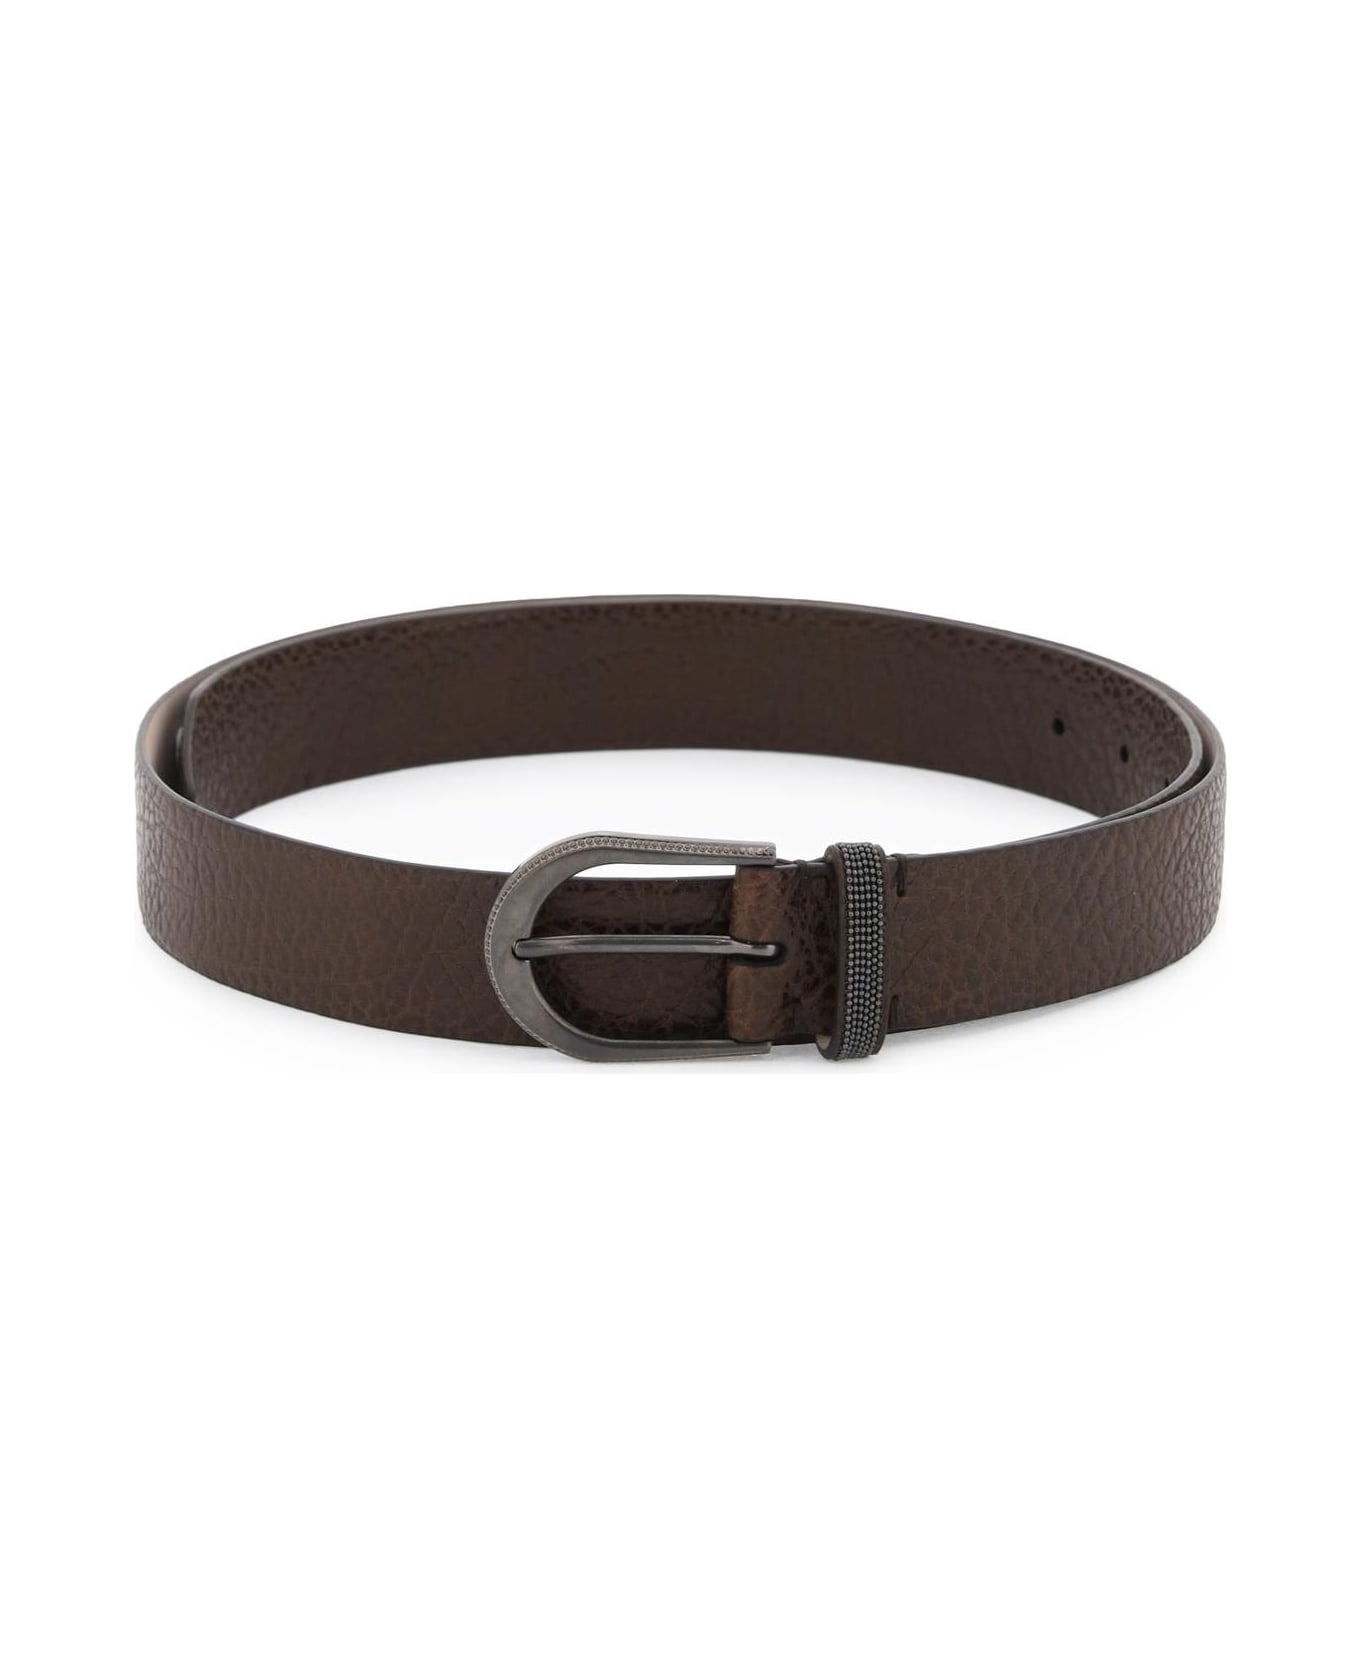 Brunello Cucinelli Leather Belt With Detailed Buckle - SIGARO (Brown)